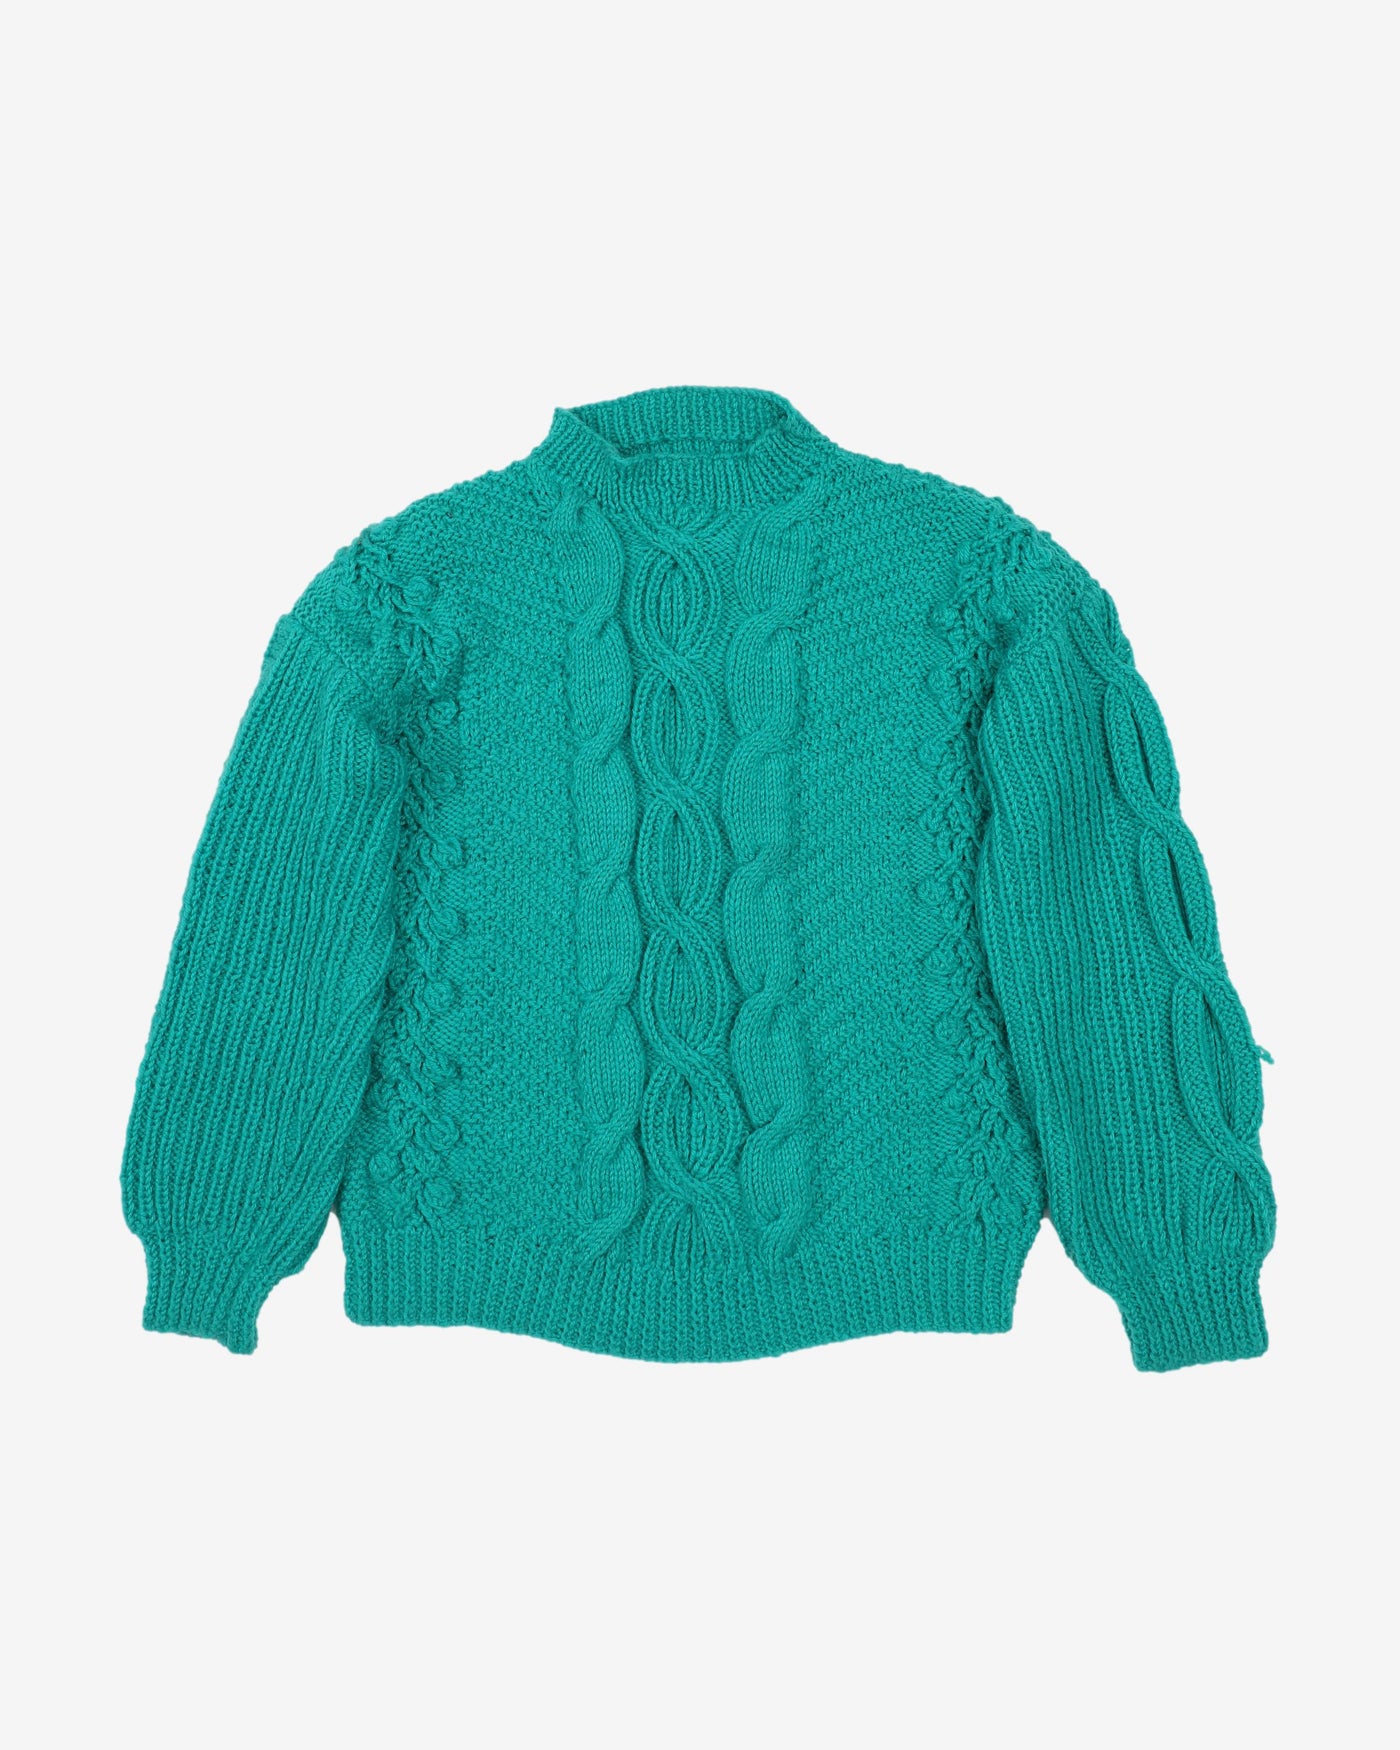 Turquoise Handmade Knitted Jumper - M